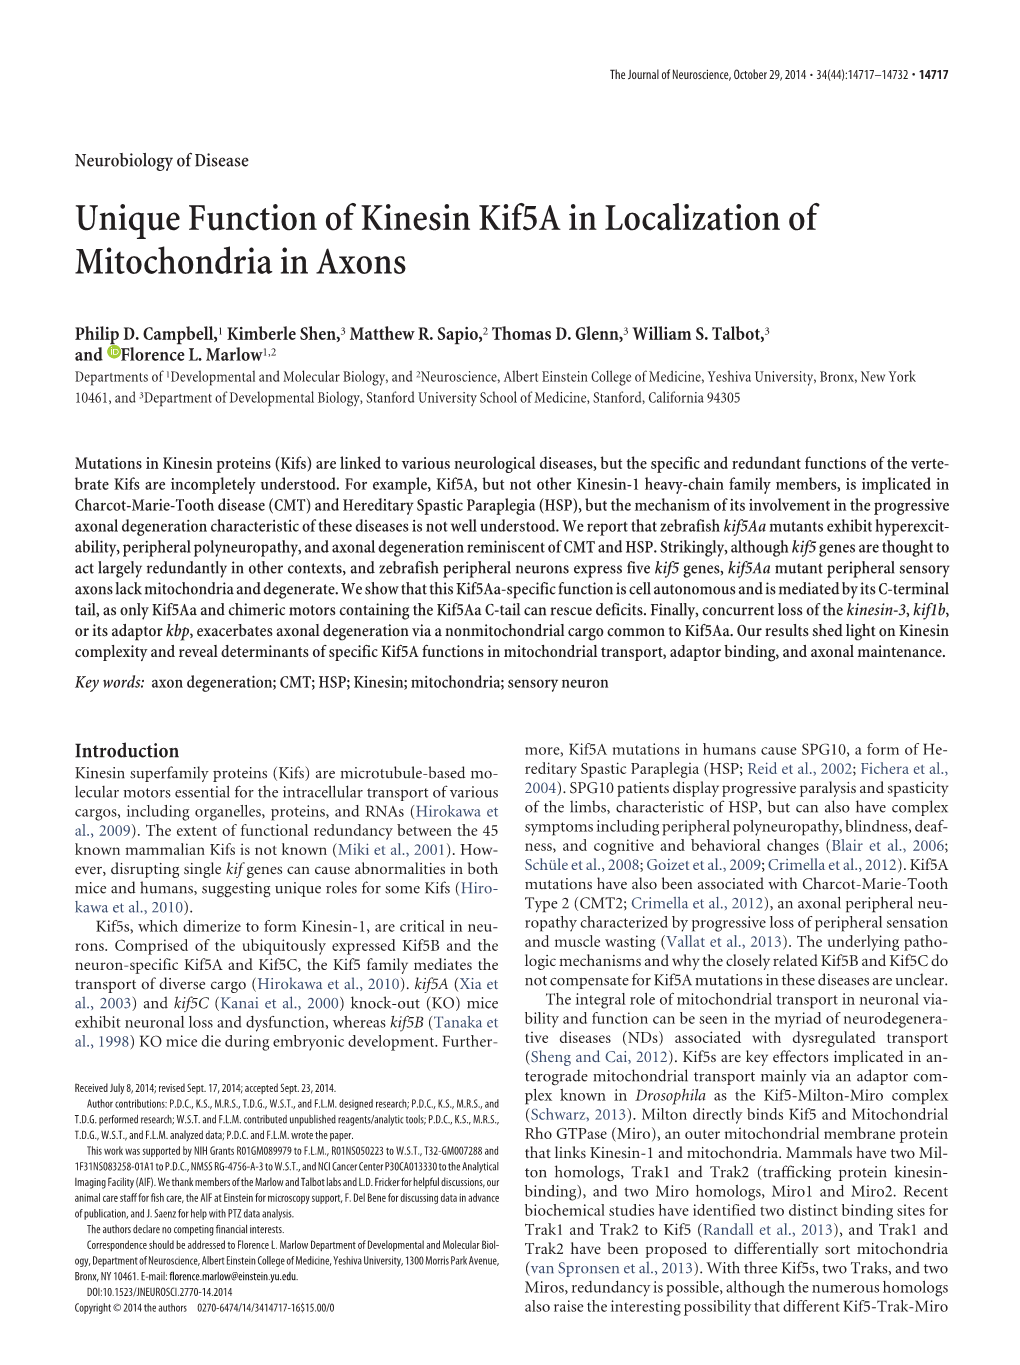 Unique Function of Kinesin Kif5a in Localization of Mitochondria in Axons